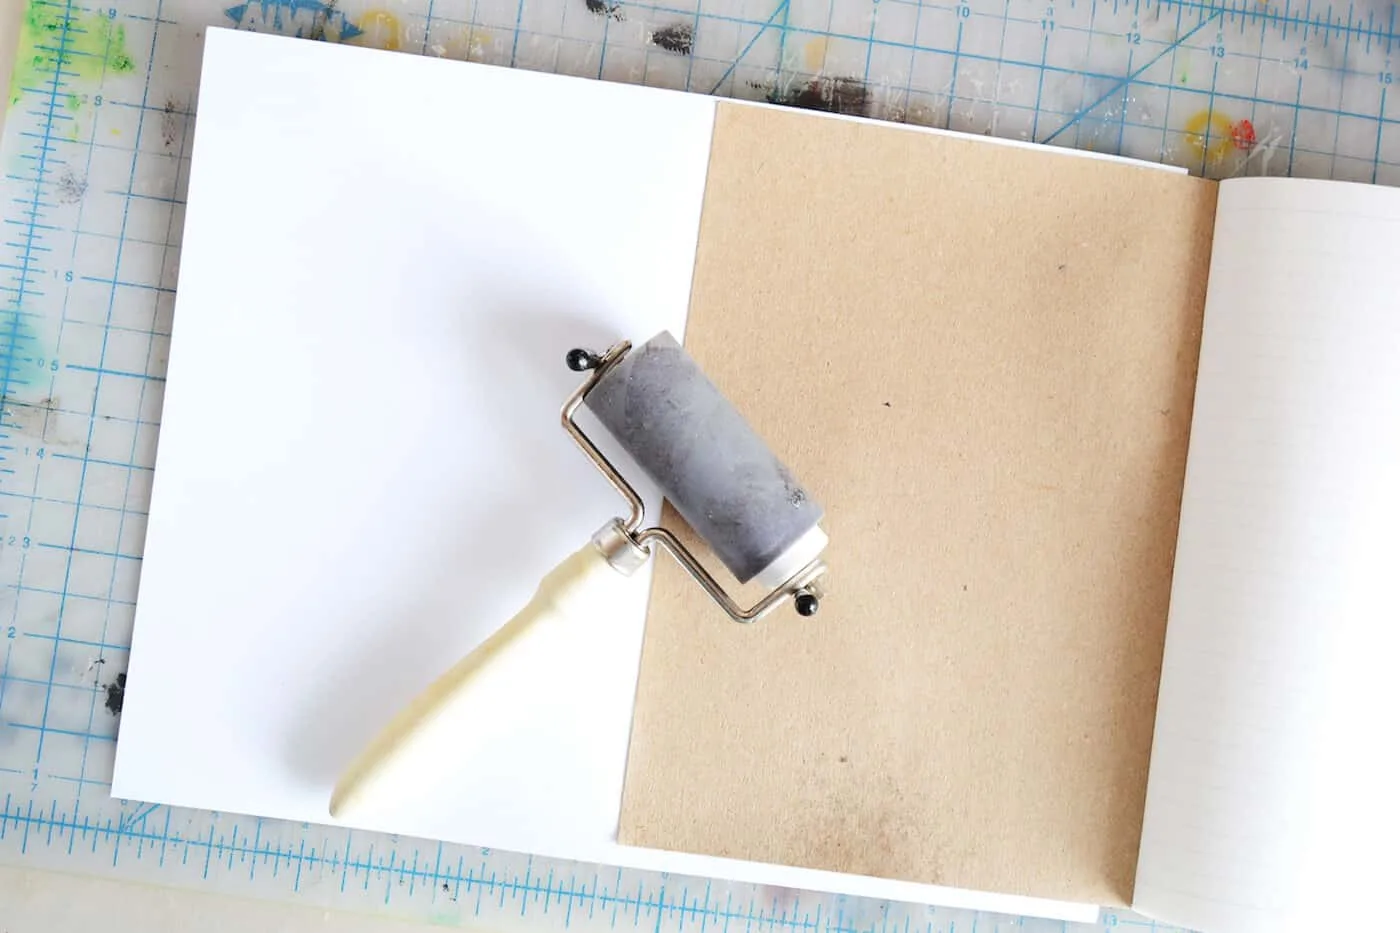 Using a brayer to adhere the paper to the notebook cover